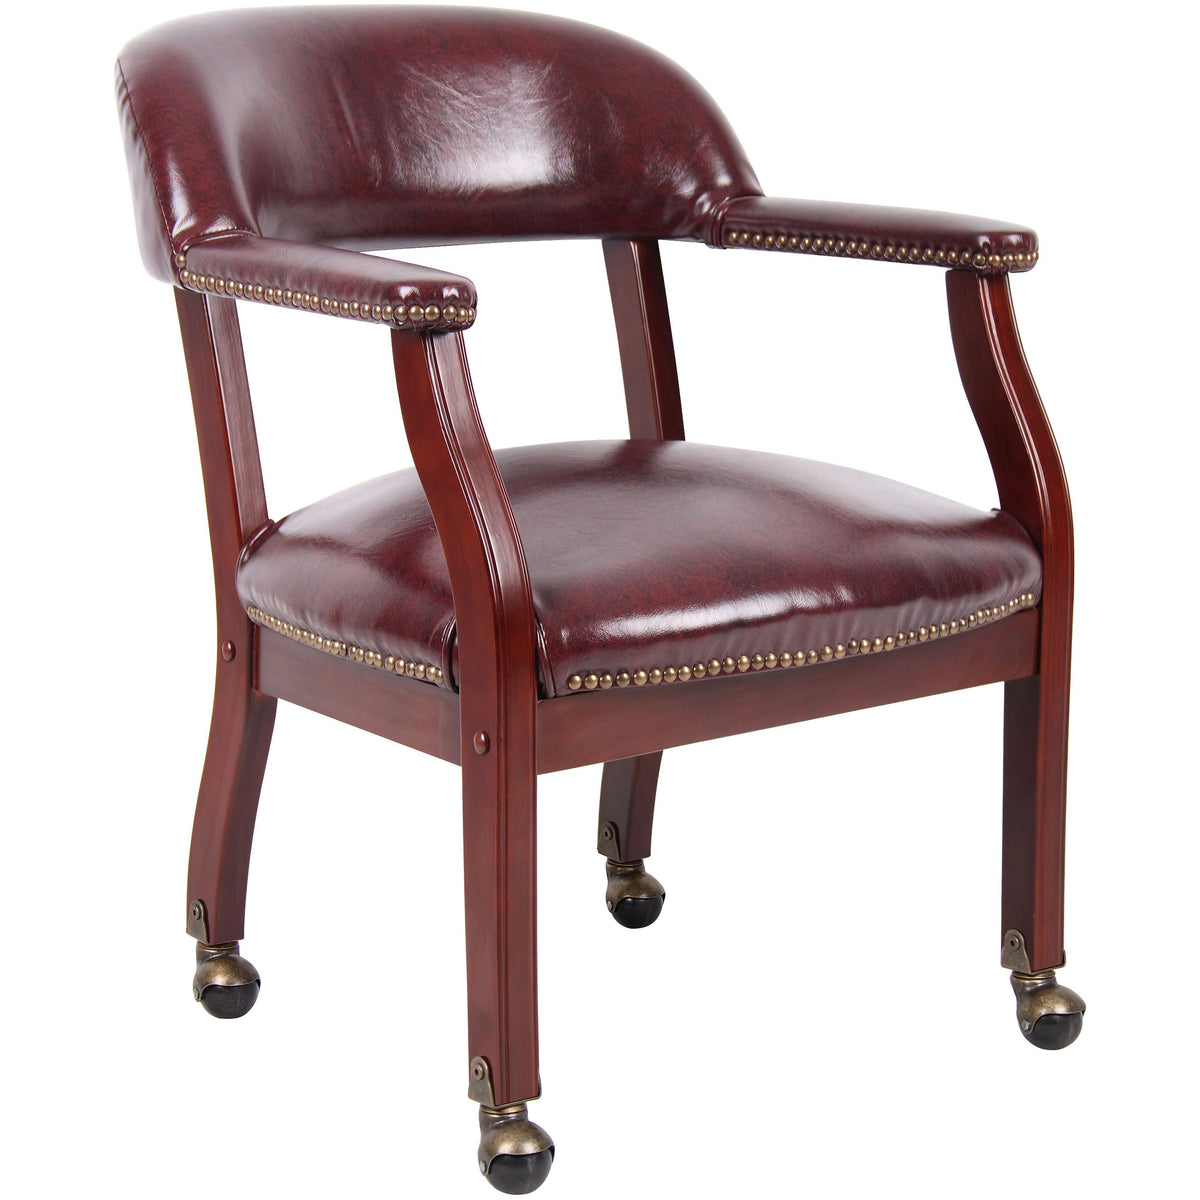 Captain's guest, accent or dining chair in Burgundy Vinyl with Casters, B9545-BY